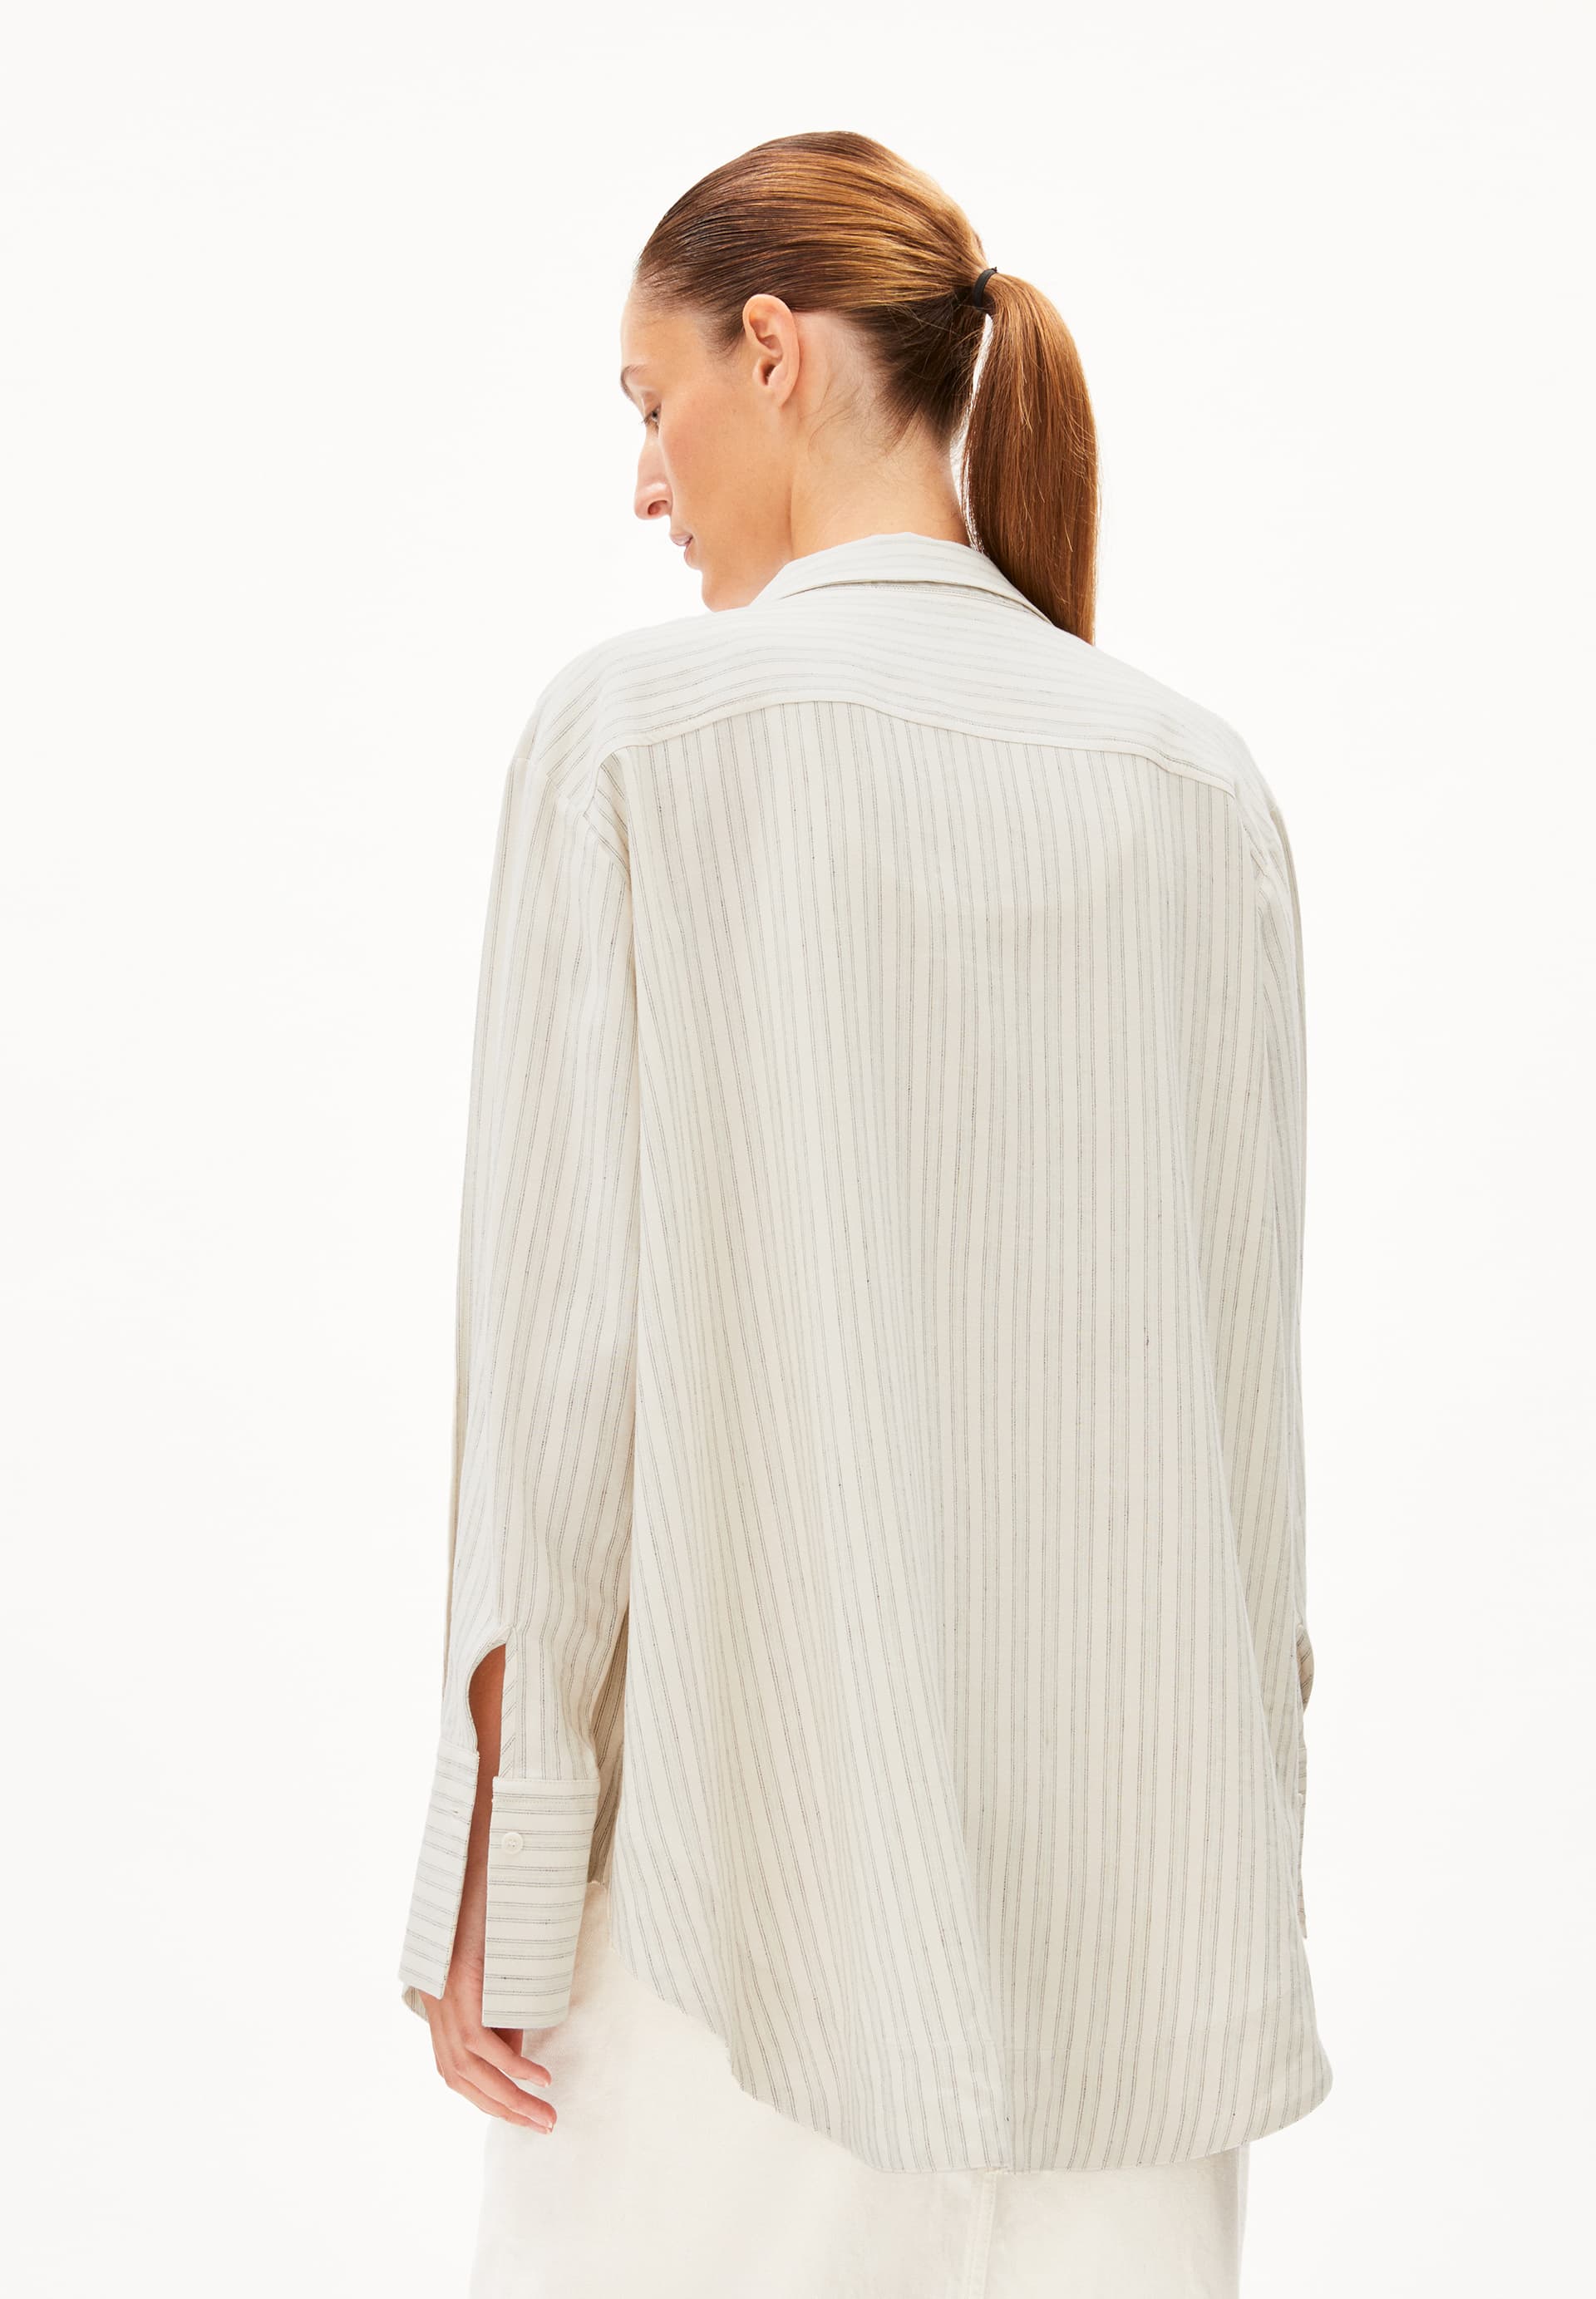 EASSAAL LINO STRIPES Blouse Loose Fit made of Linen-Mix